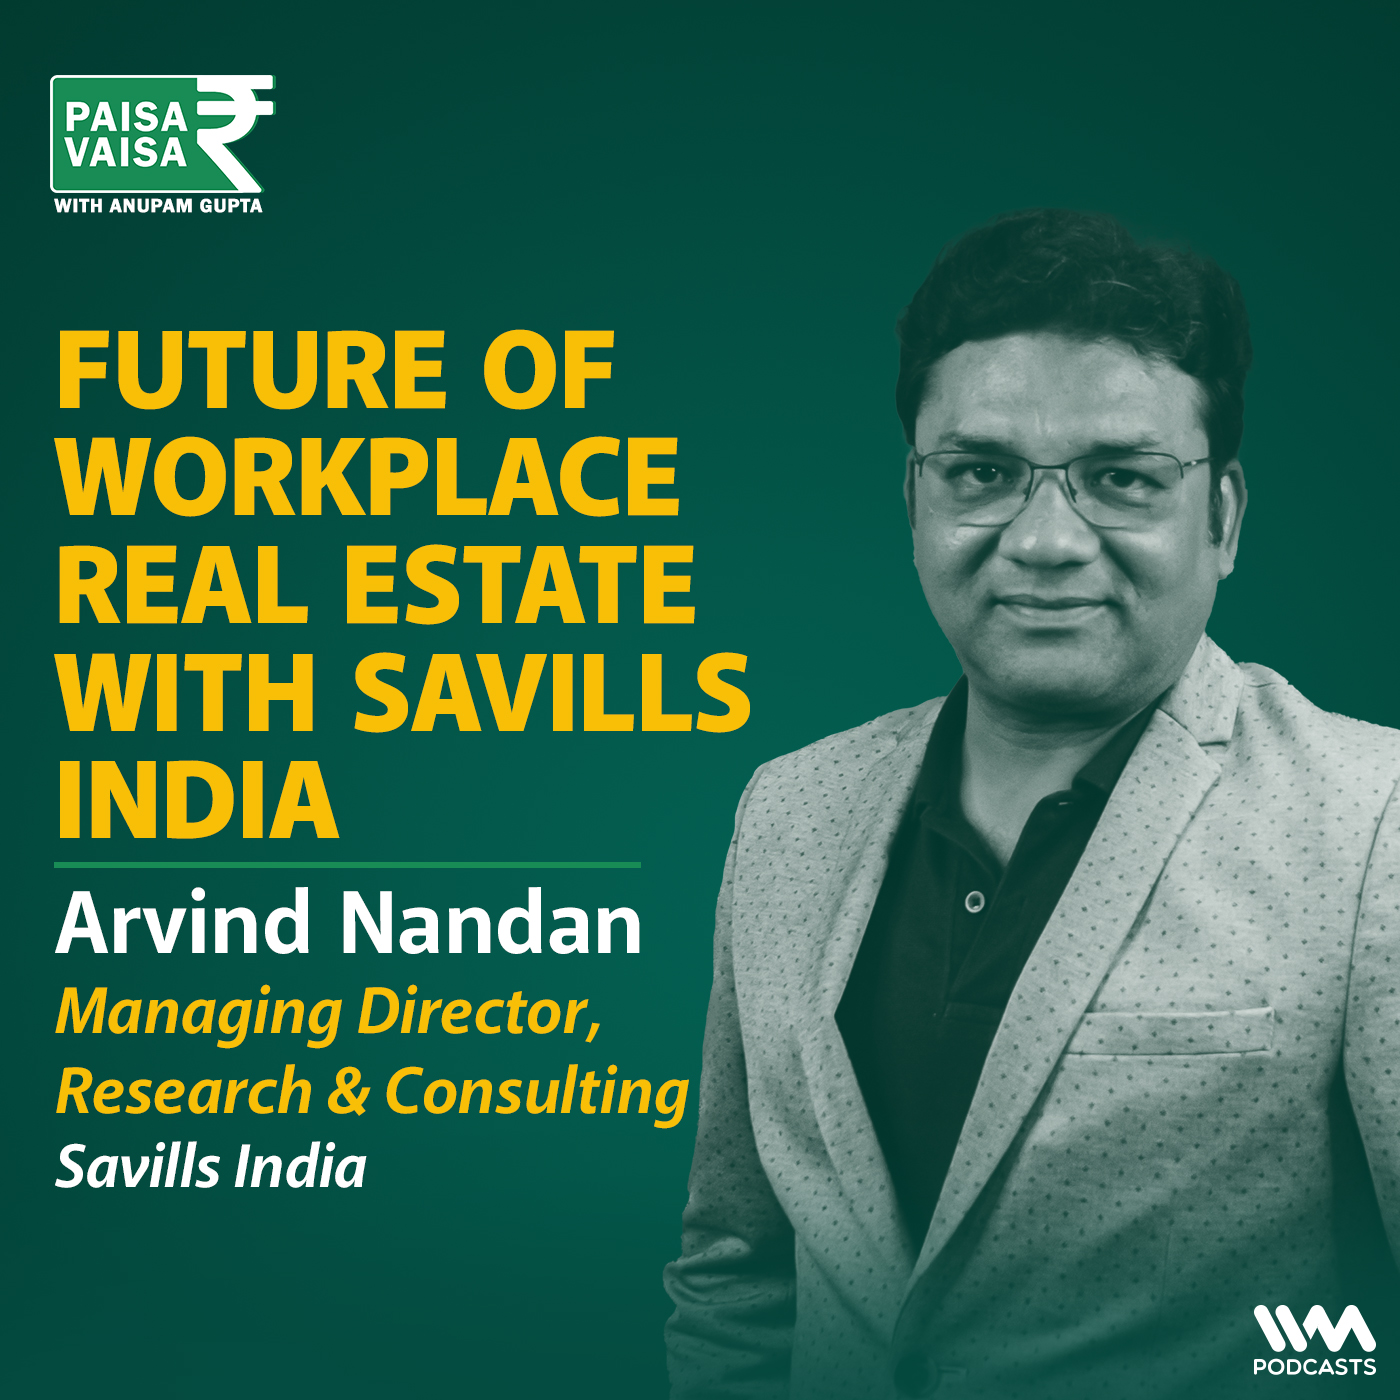 Future of Workplace Real Estate with Savills India